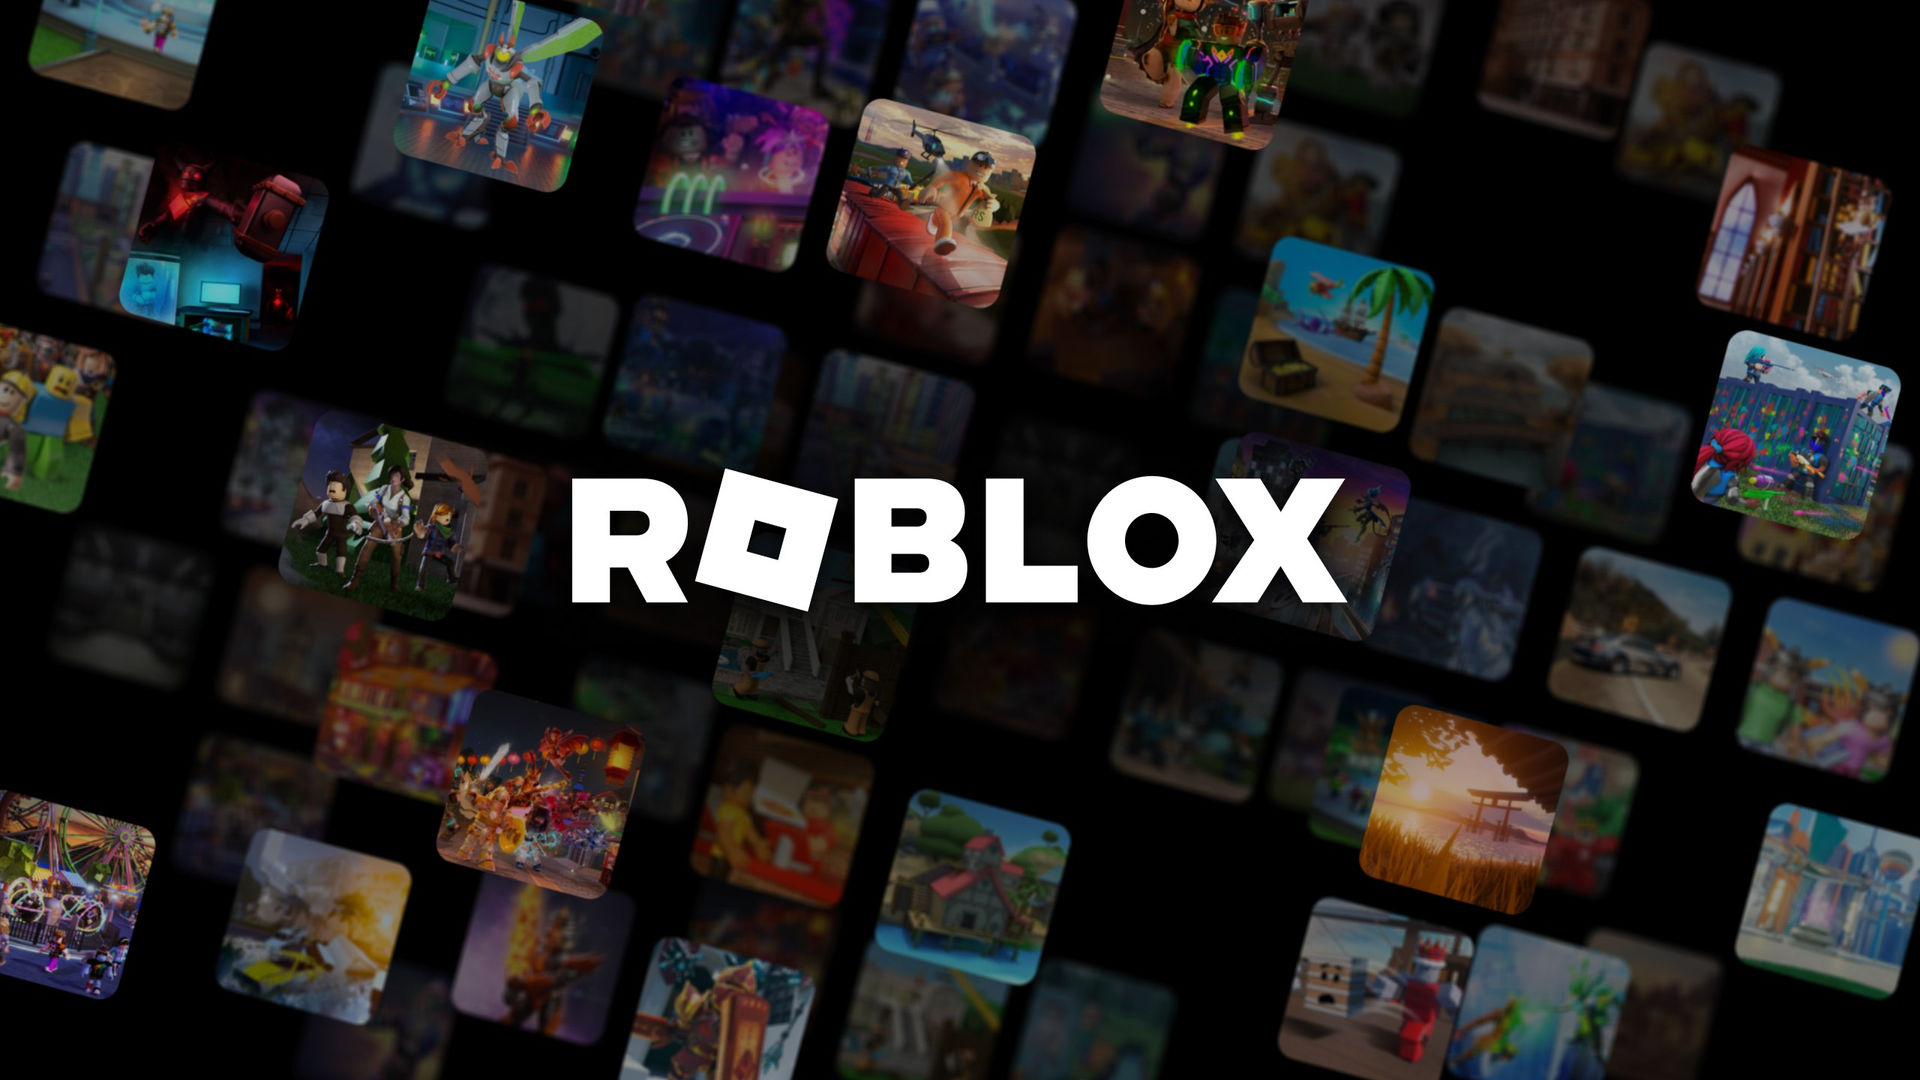 Game Roblox HD Pictures.  Gaming wallpapers hd, Roblox pictures, Gaming  wallpapers